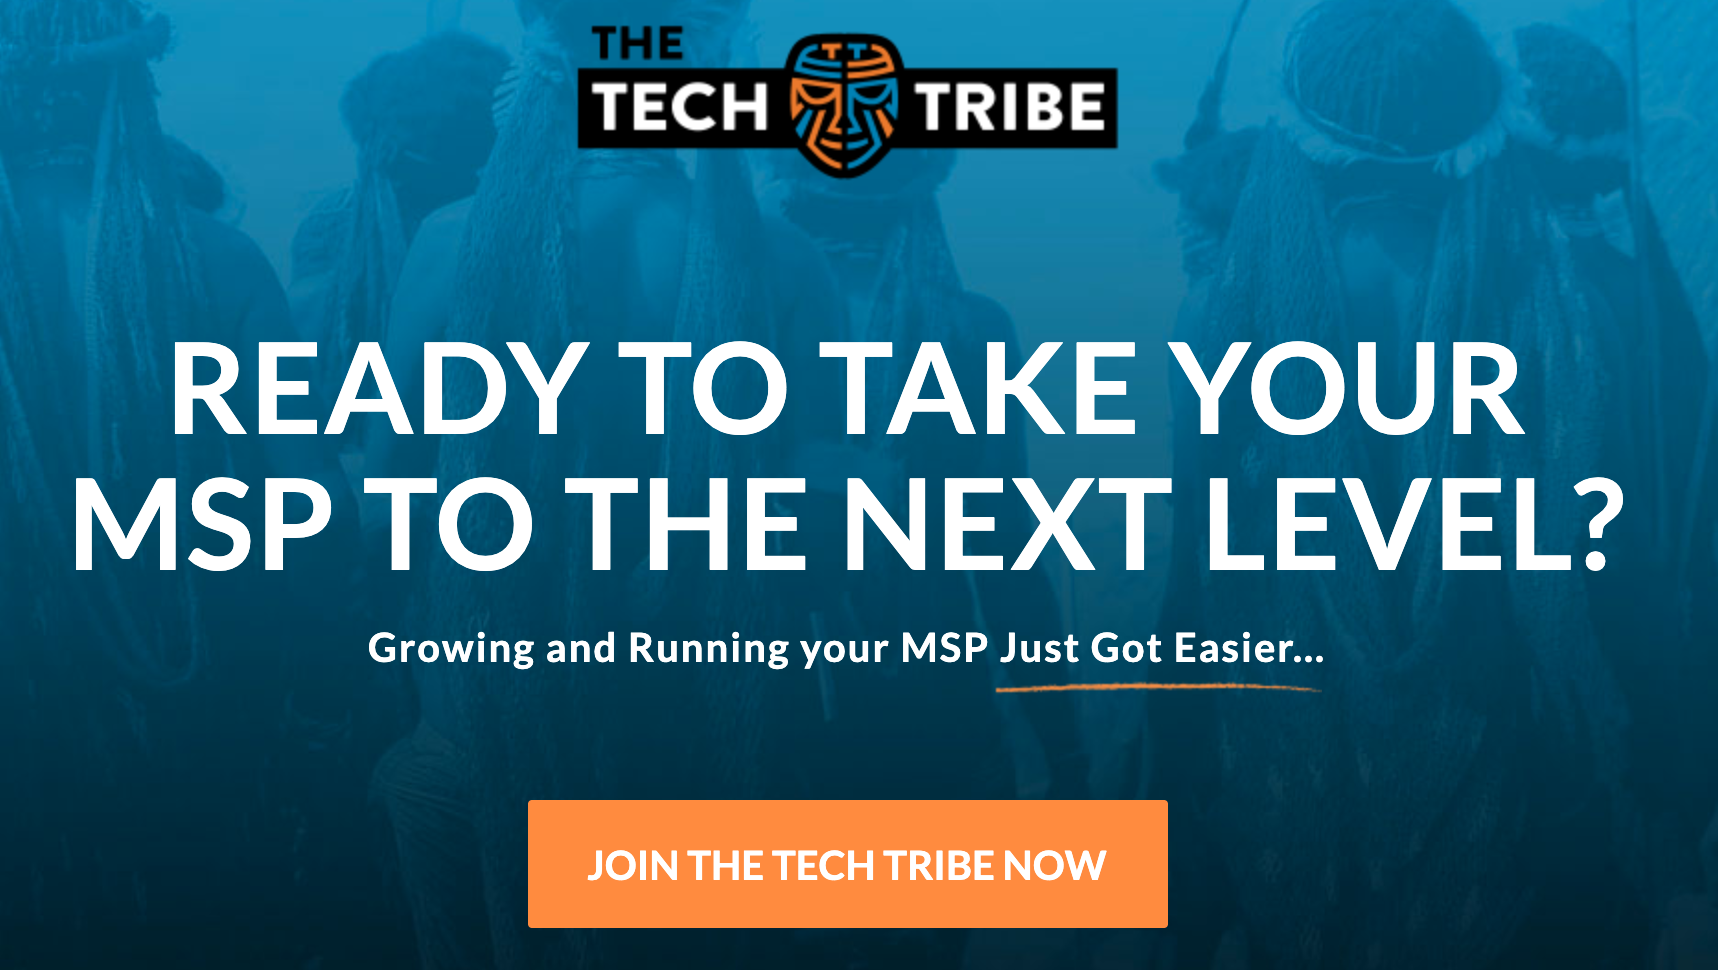 The Tech Tribe - Growing and running your MSP